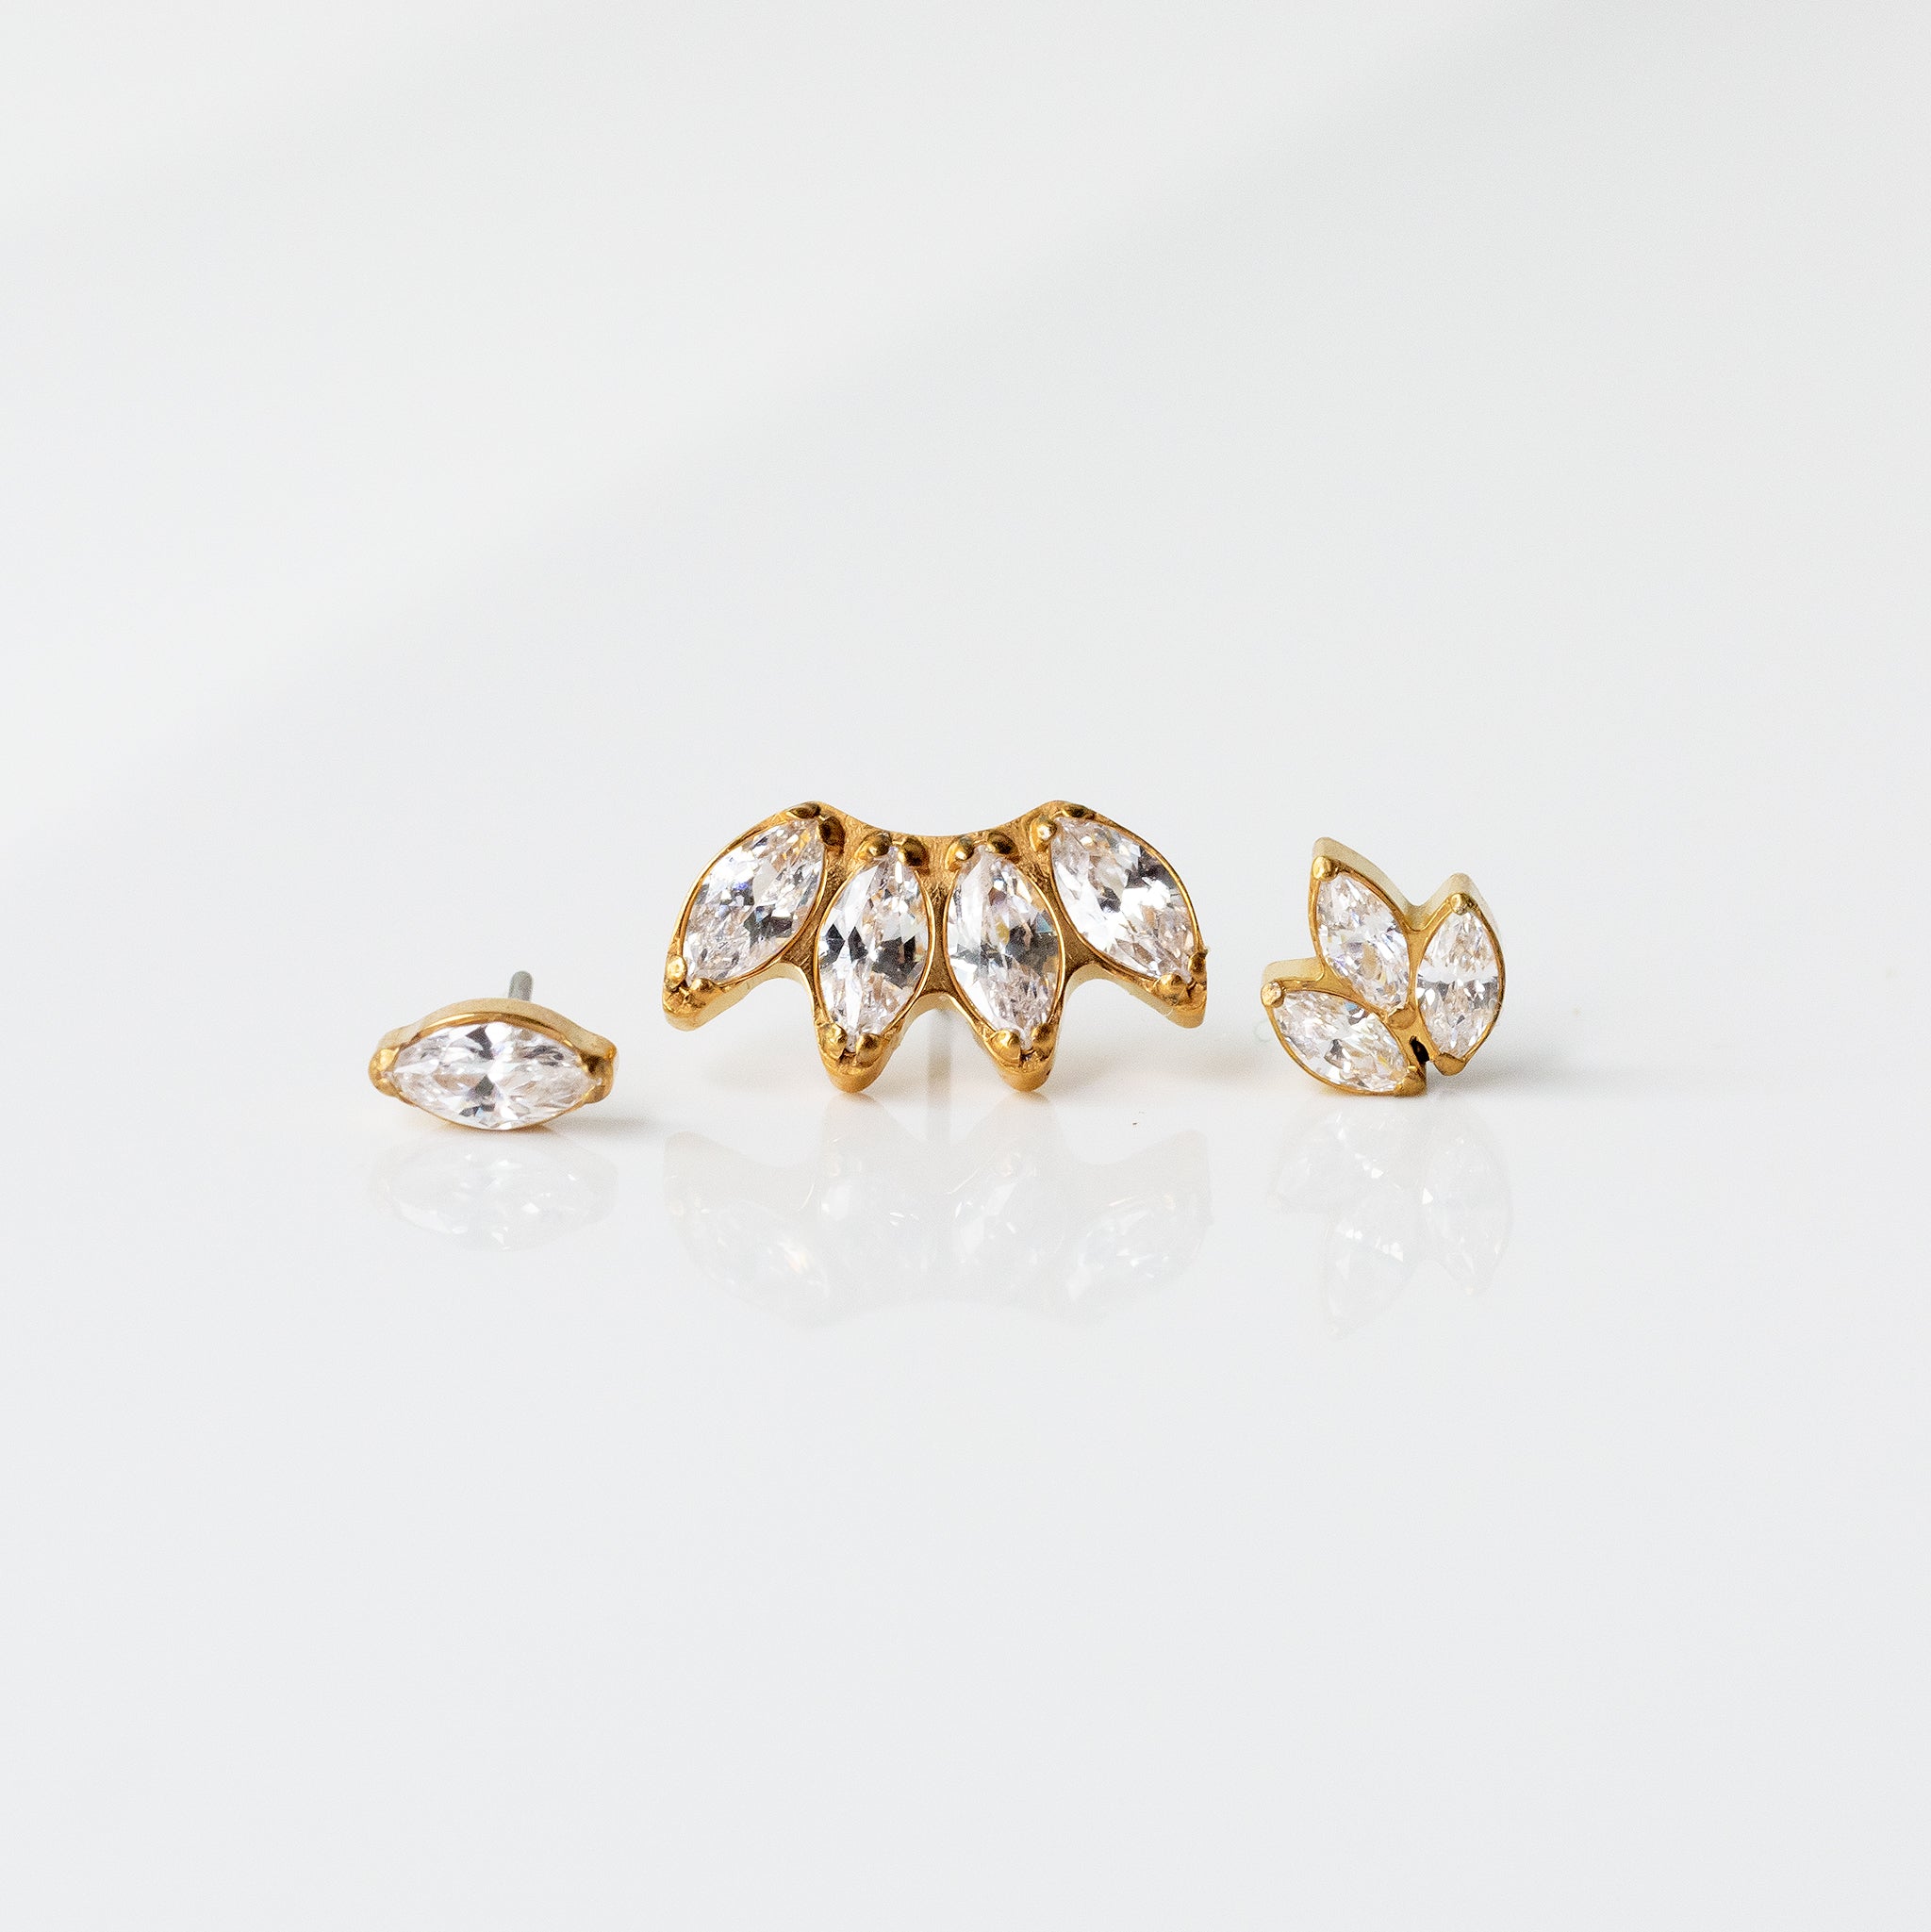 KIKICHIC | Minimalist Jewelry | NYC | Ball Screw Flat Back Tiny CZ Trinity Stud  Earrings Cartilage, Tragus, Helix, Conch in Sterling Silver in 14k Gold and  Silver.